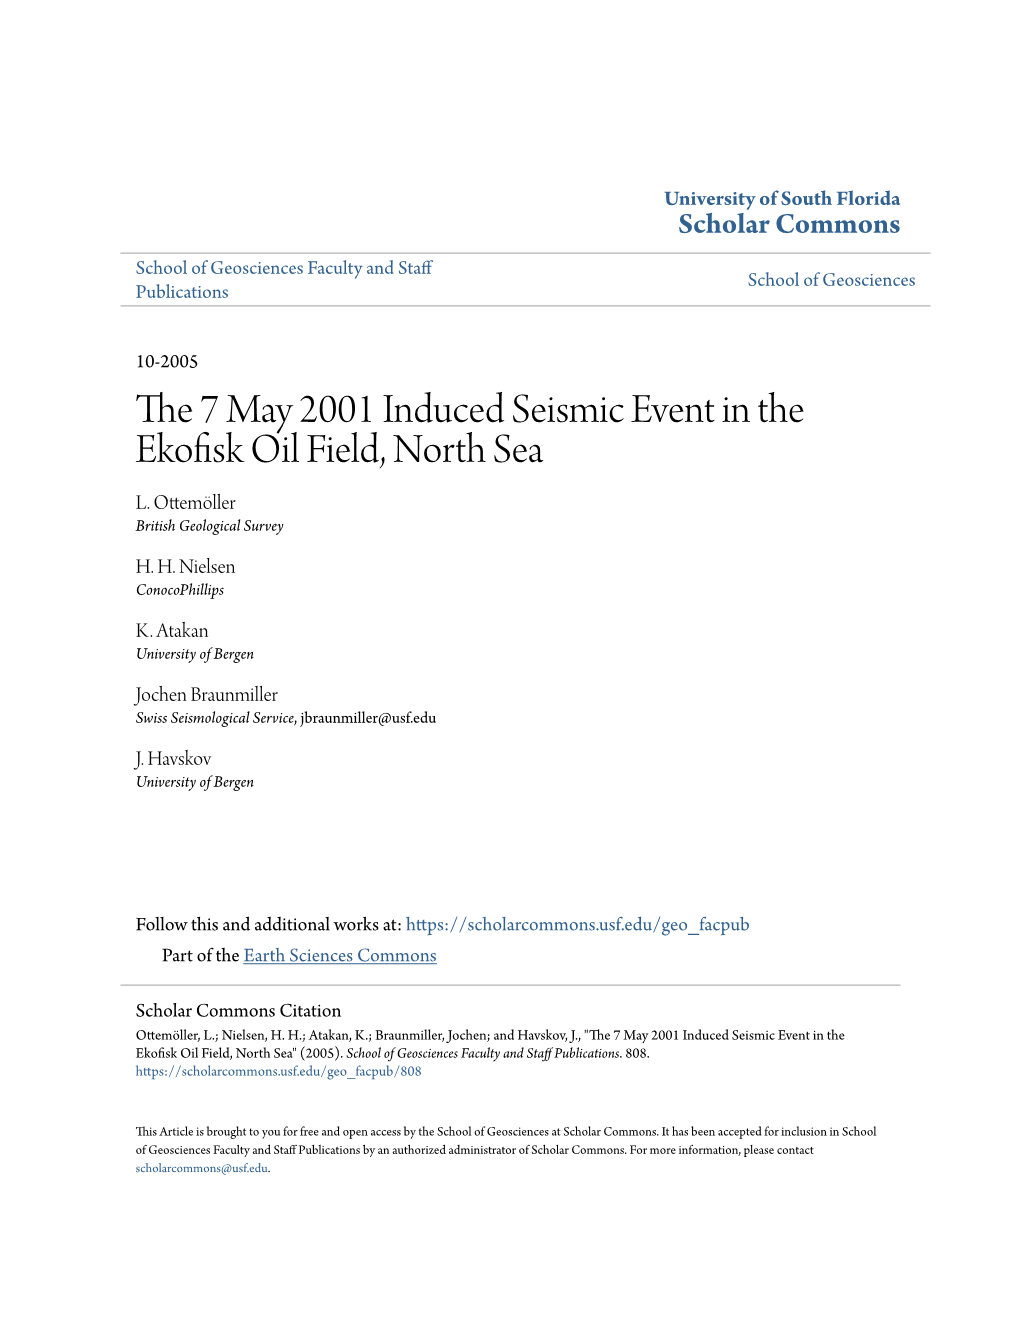 The 7 May 2001 Induced Seismic Event in the Ekofisk Oil Field, North Sea L